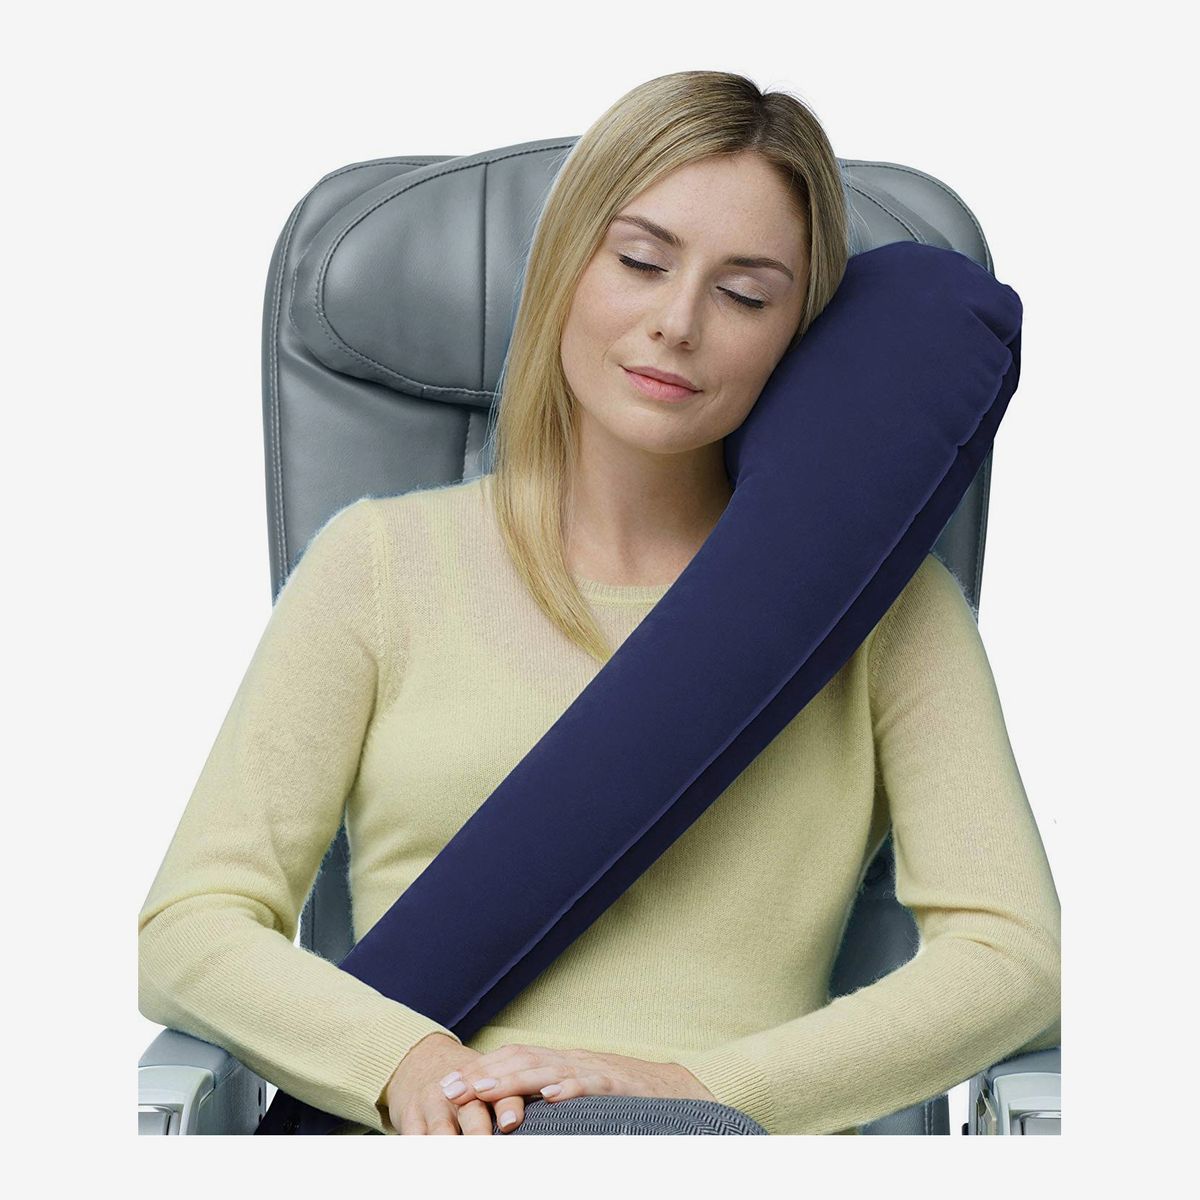 U Shaped Air Pillow For Neck SupportsRelief The Pain Travel Sleeping Comfortable 